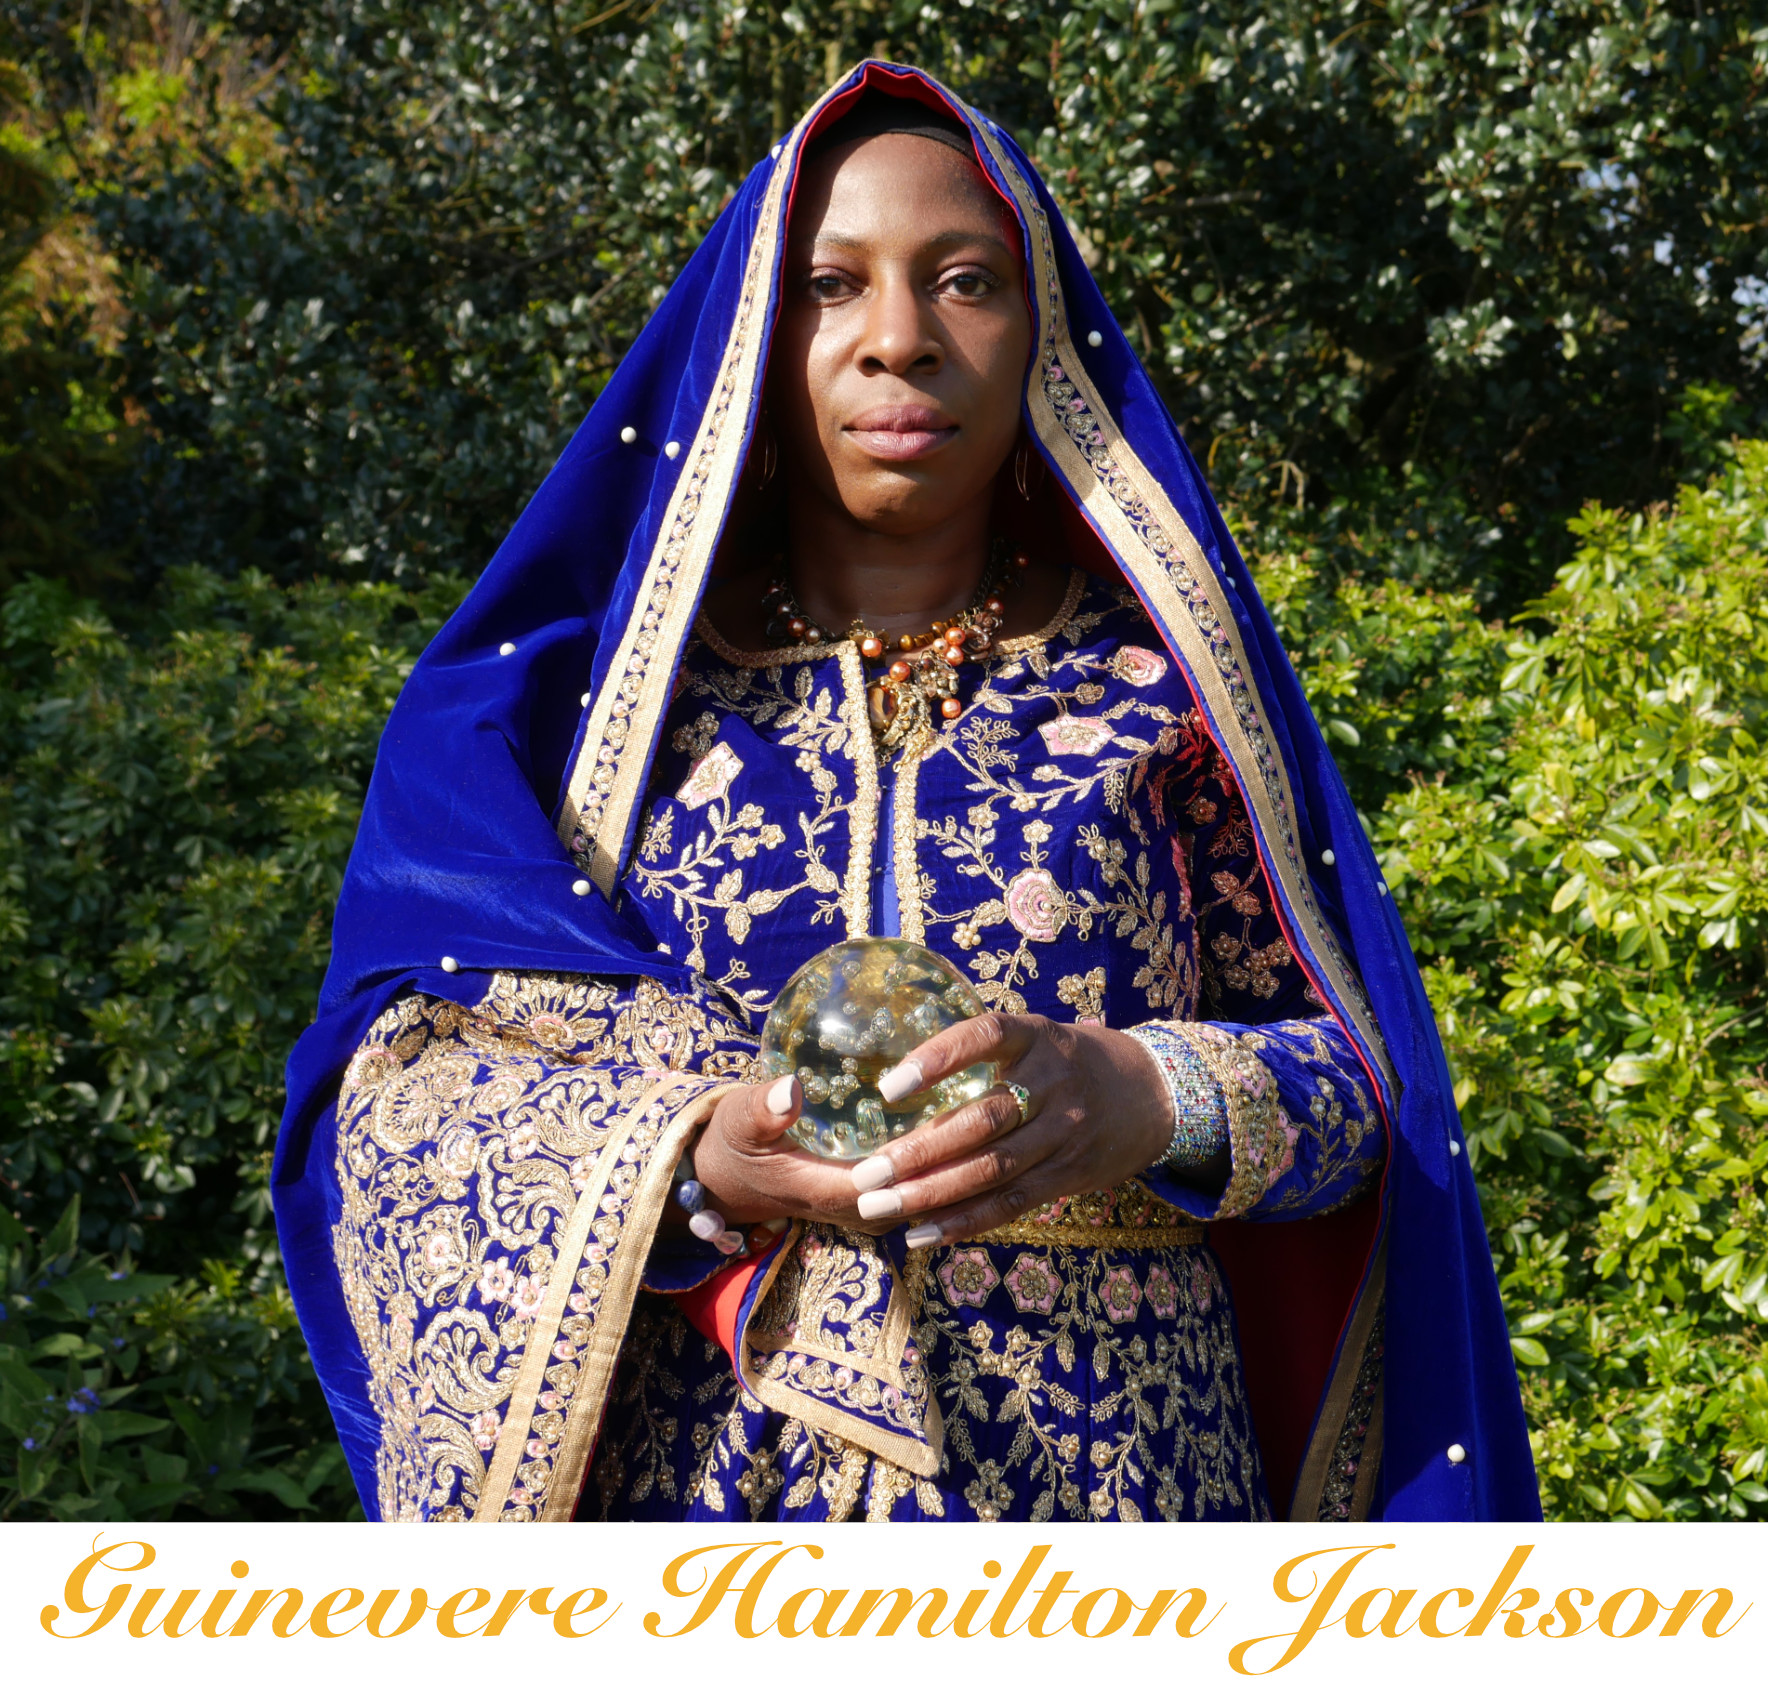 Guinevere Hamilton Jackson Red Blue Shawl In The Park